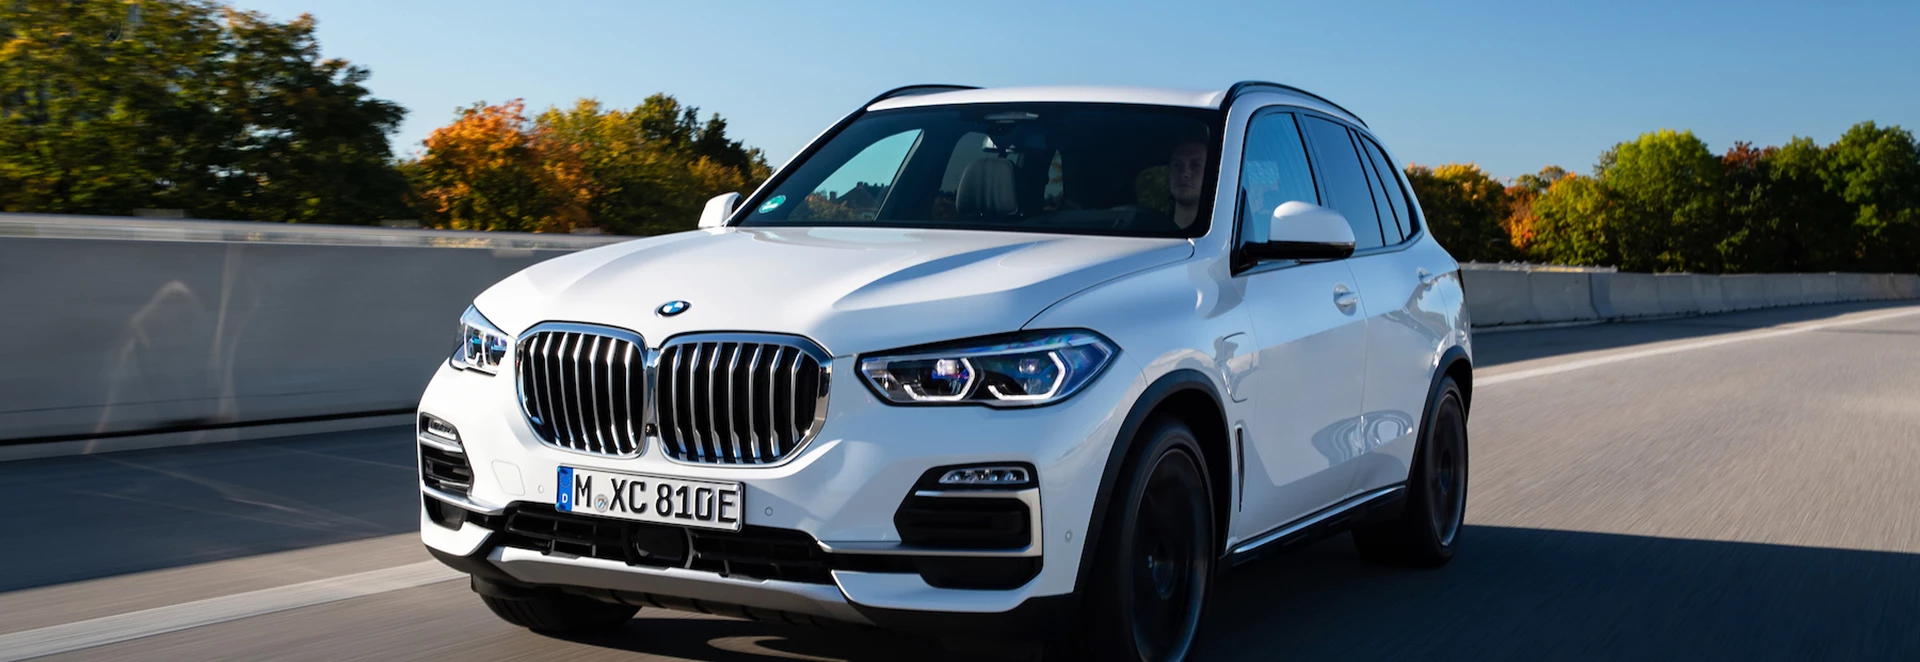 BMW sets October sales record with SUVs and luxury models rising in demand